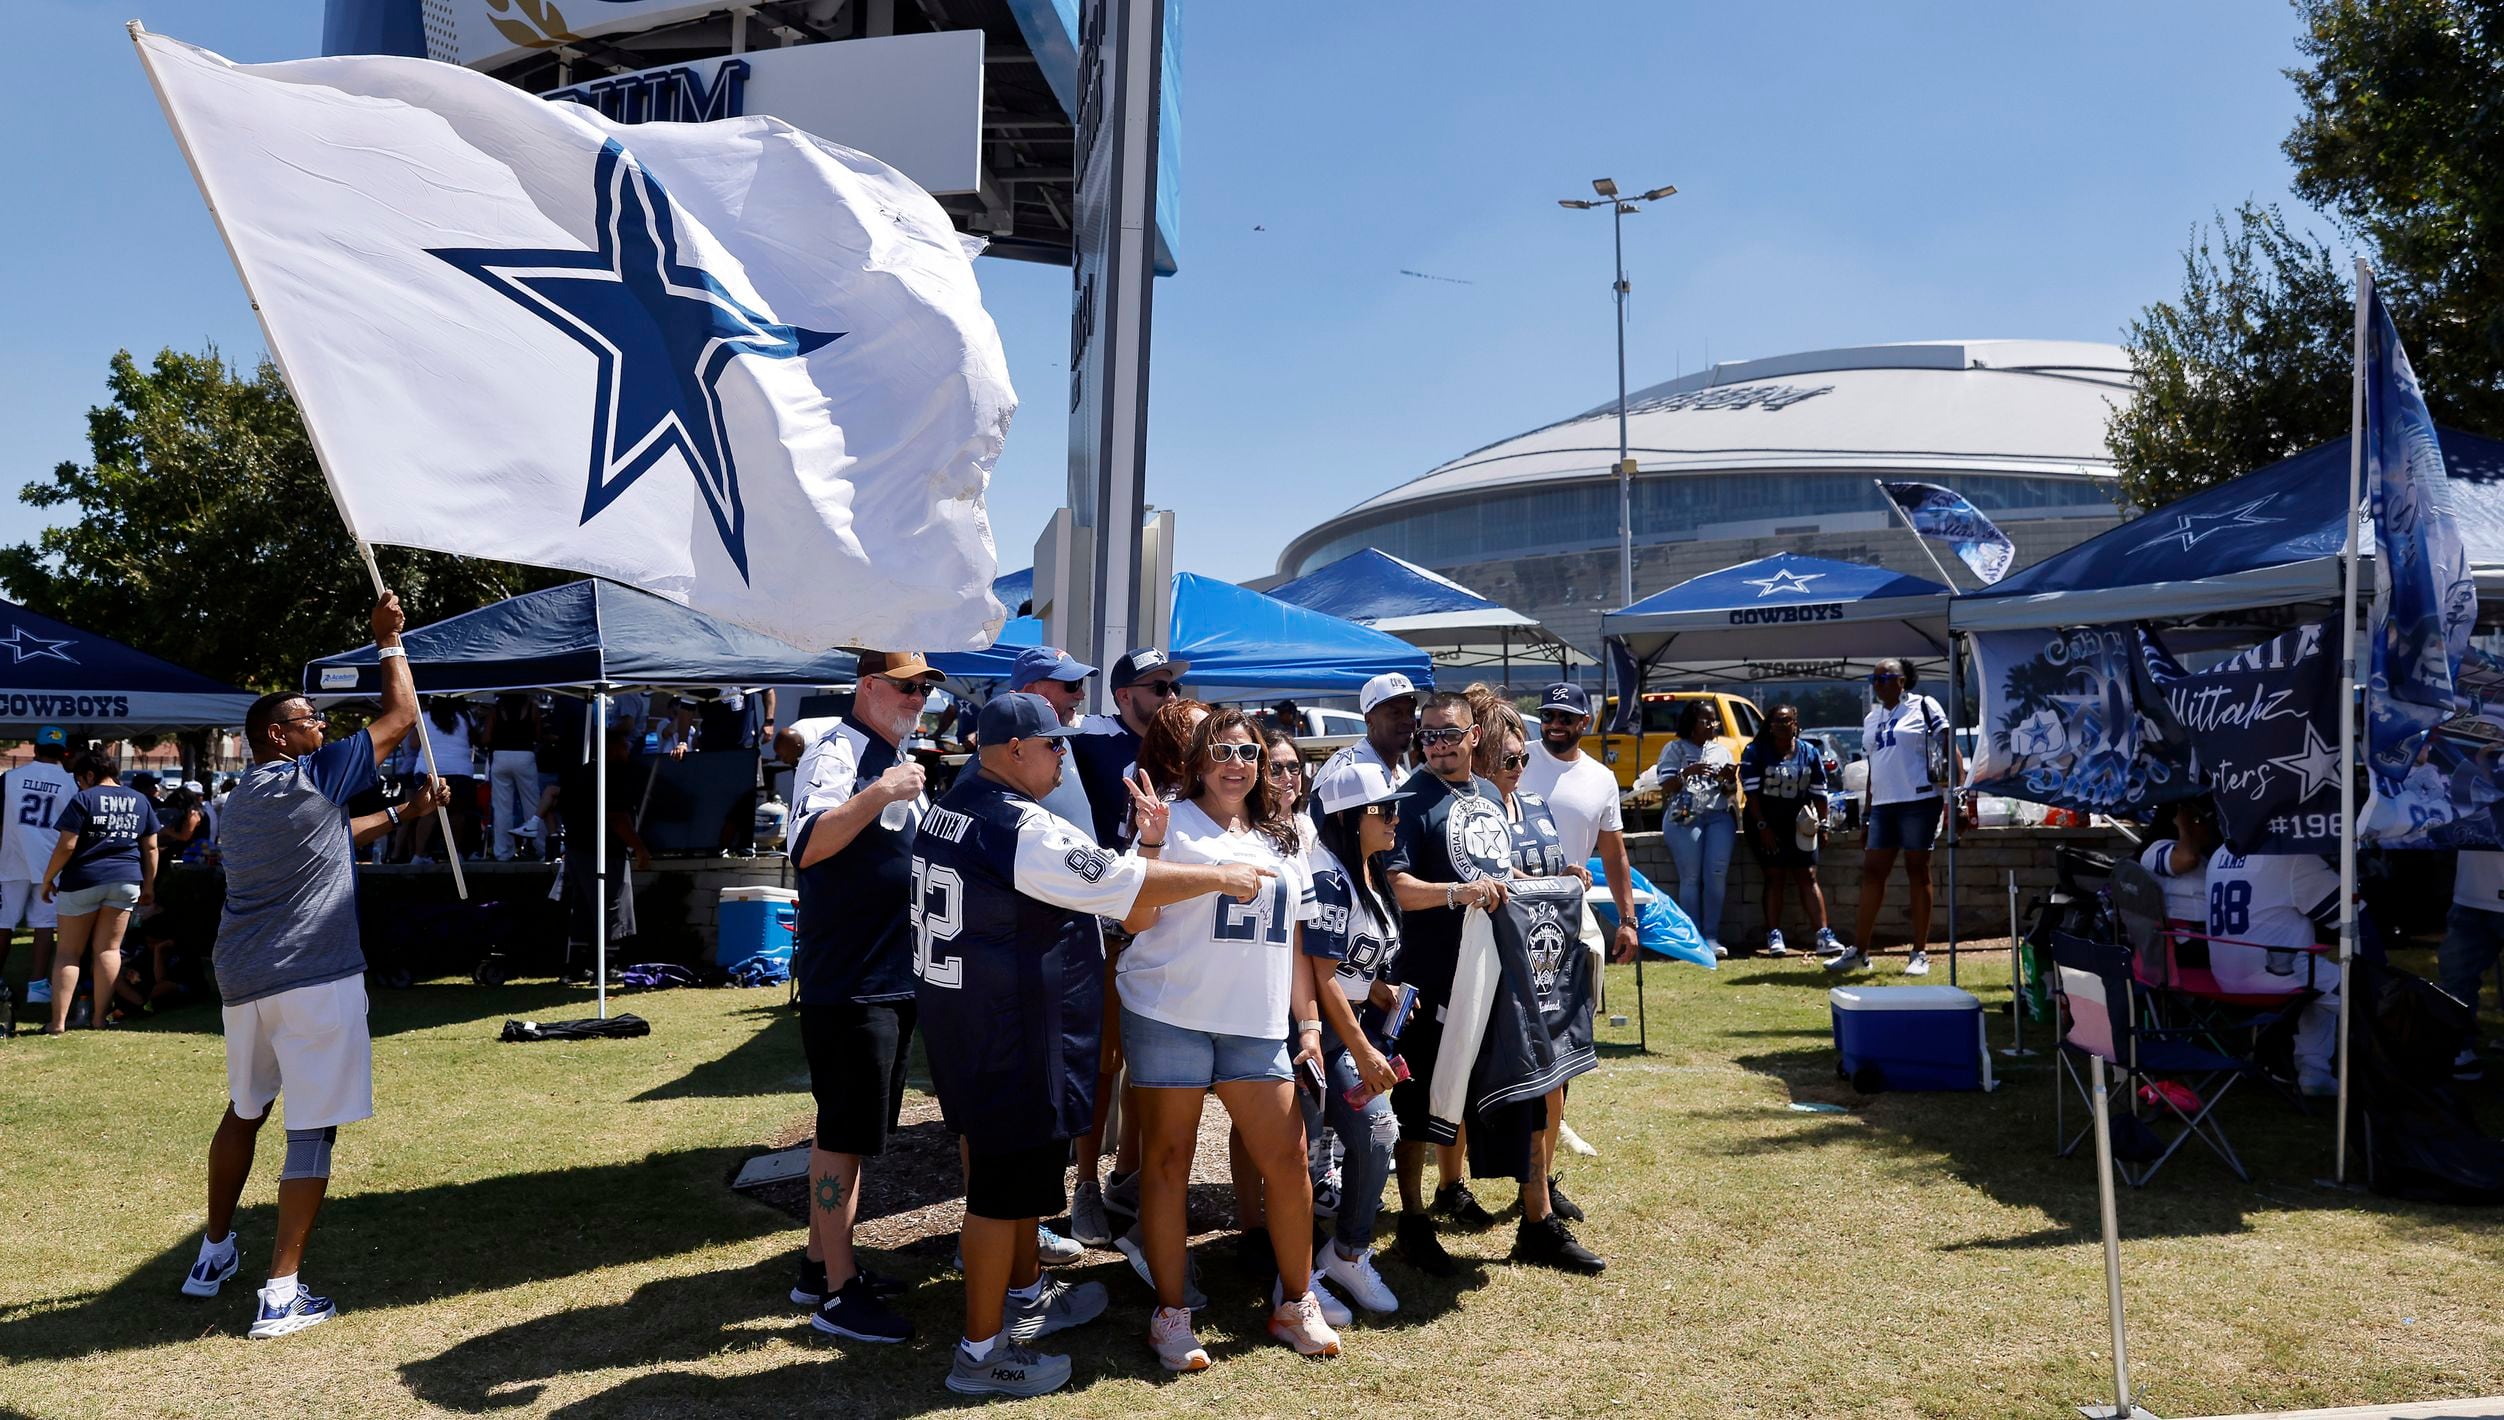 Cowboys fans descend upon AT&T Stadium for Week 2 opener against the Jets